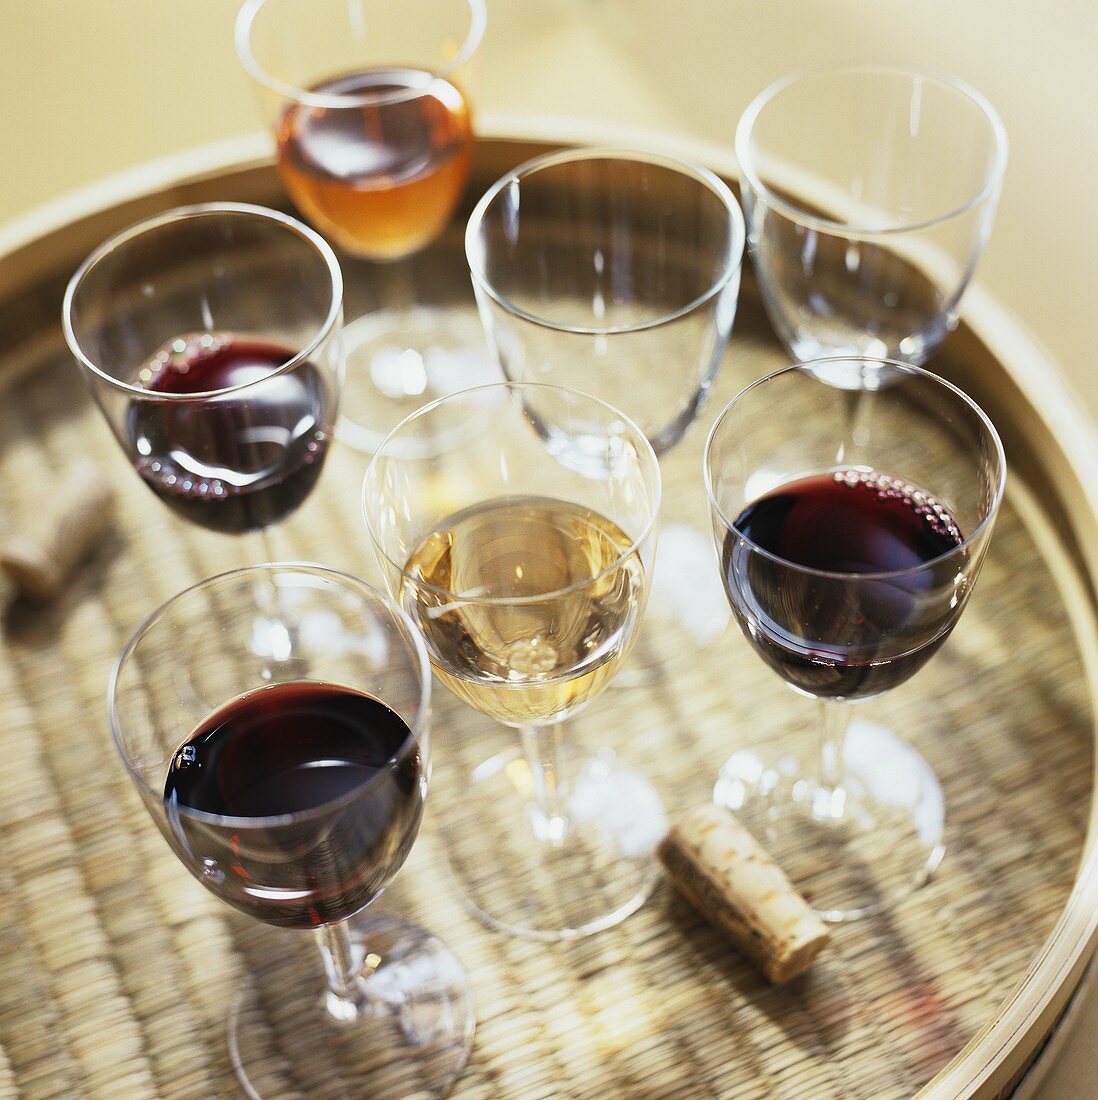 Glasses of Red and White Wine on a Serving Tray